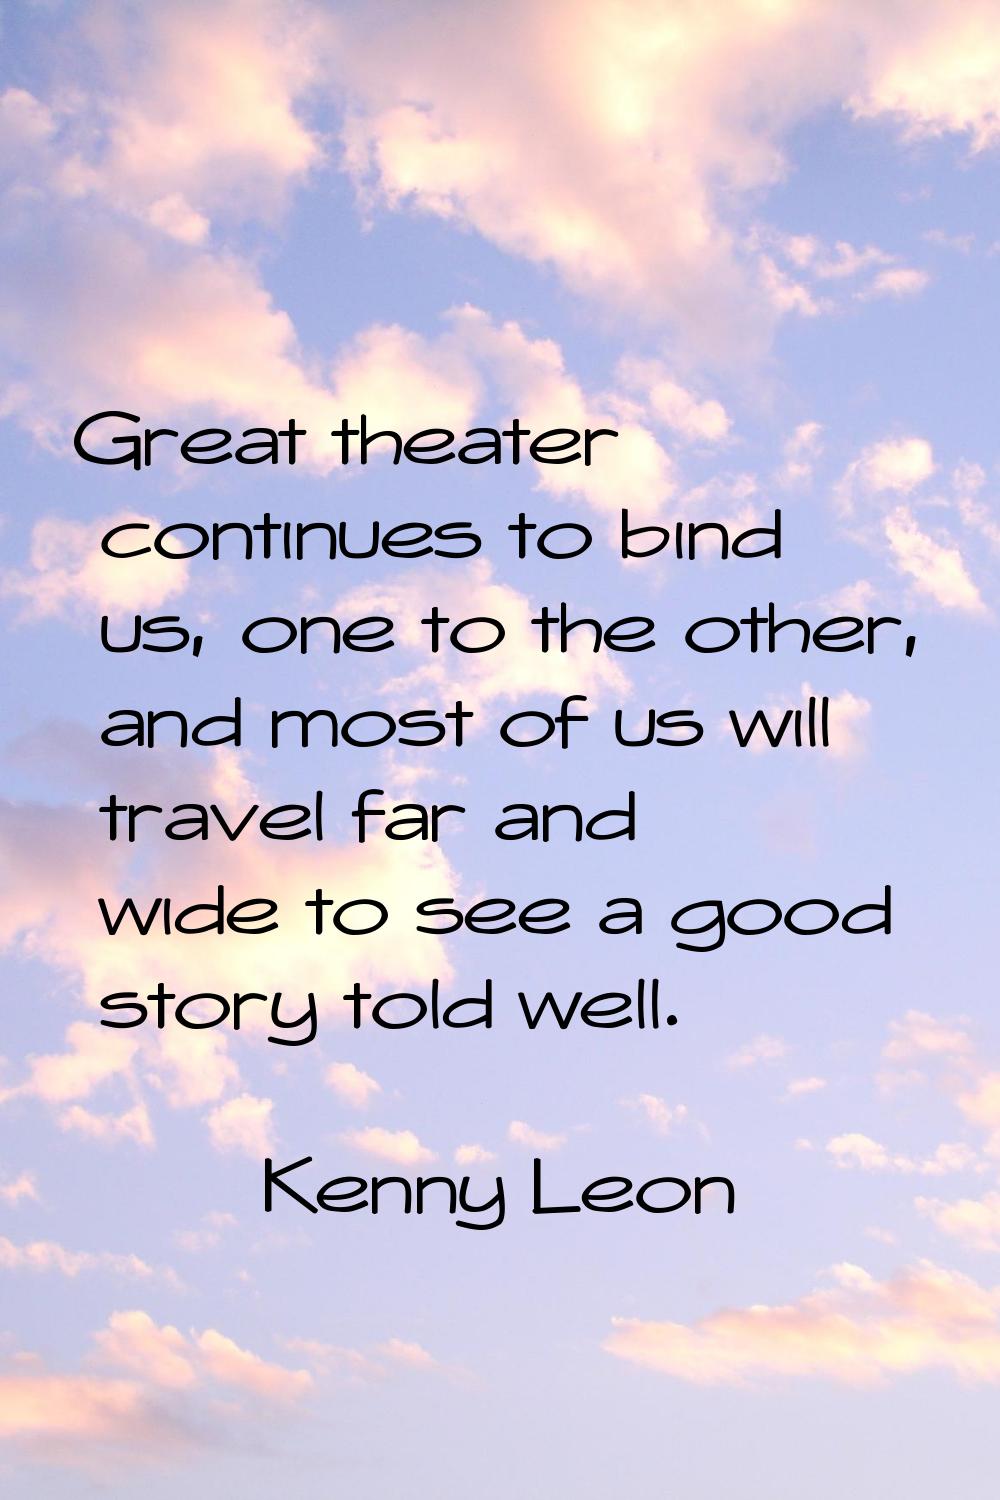 Great theater continues to bind us, one to the other, and most of us will travel far and wide to se